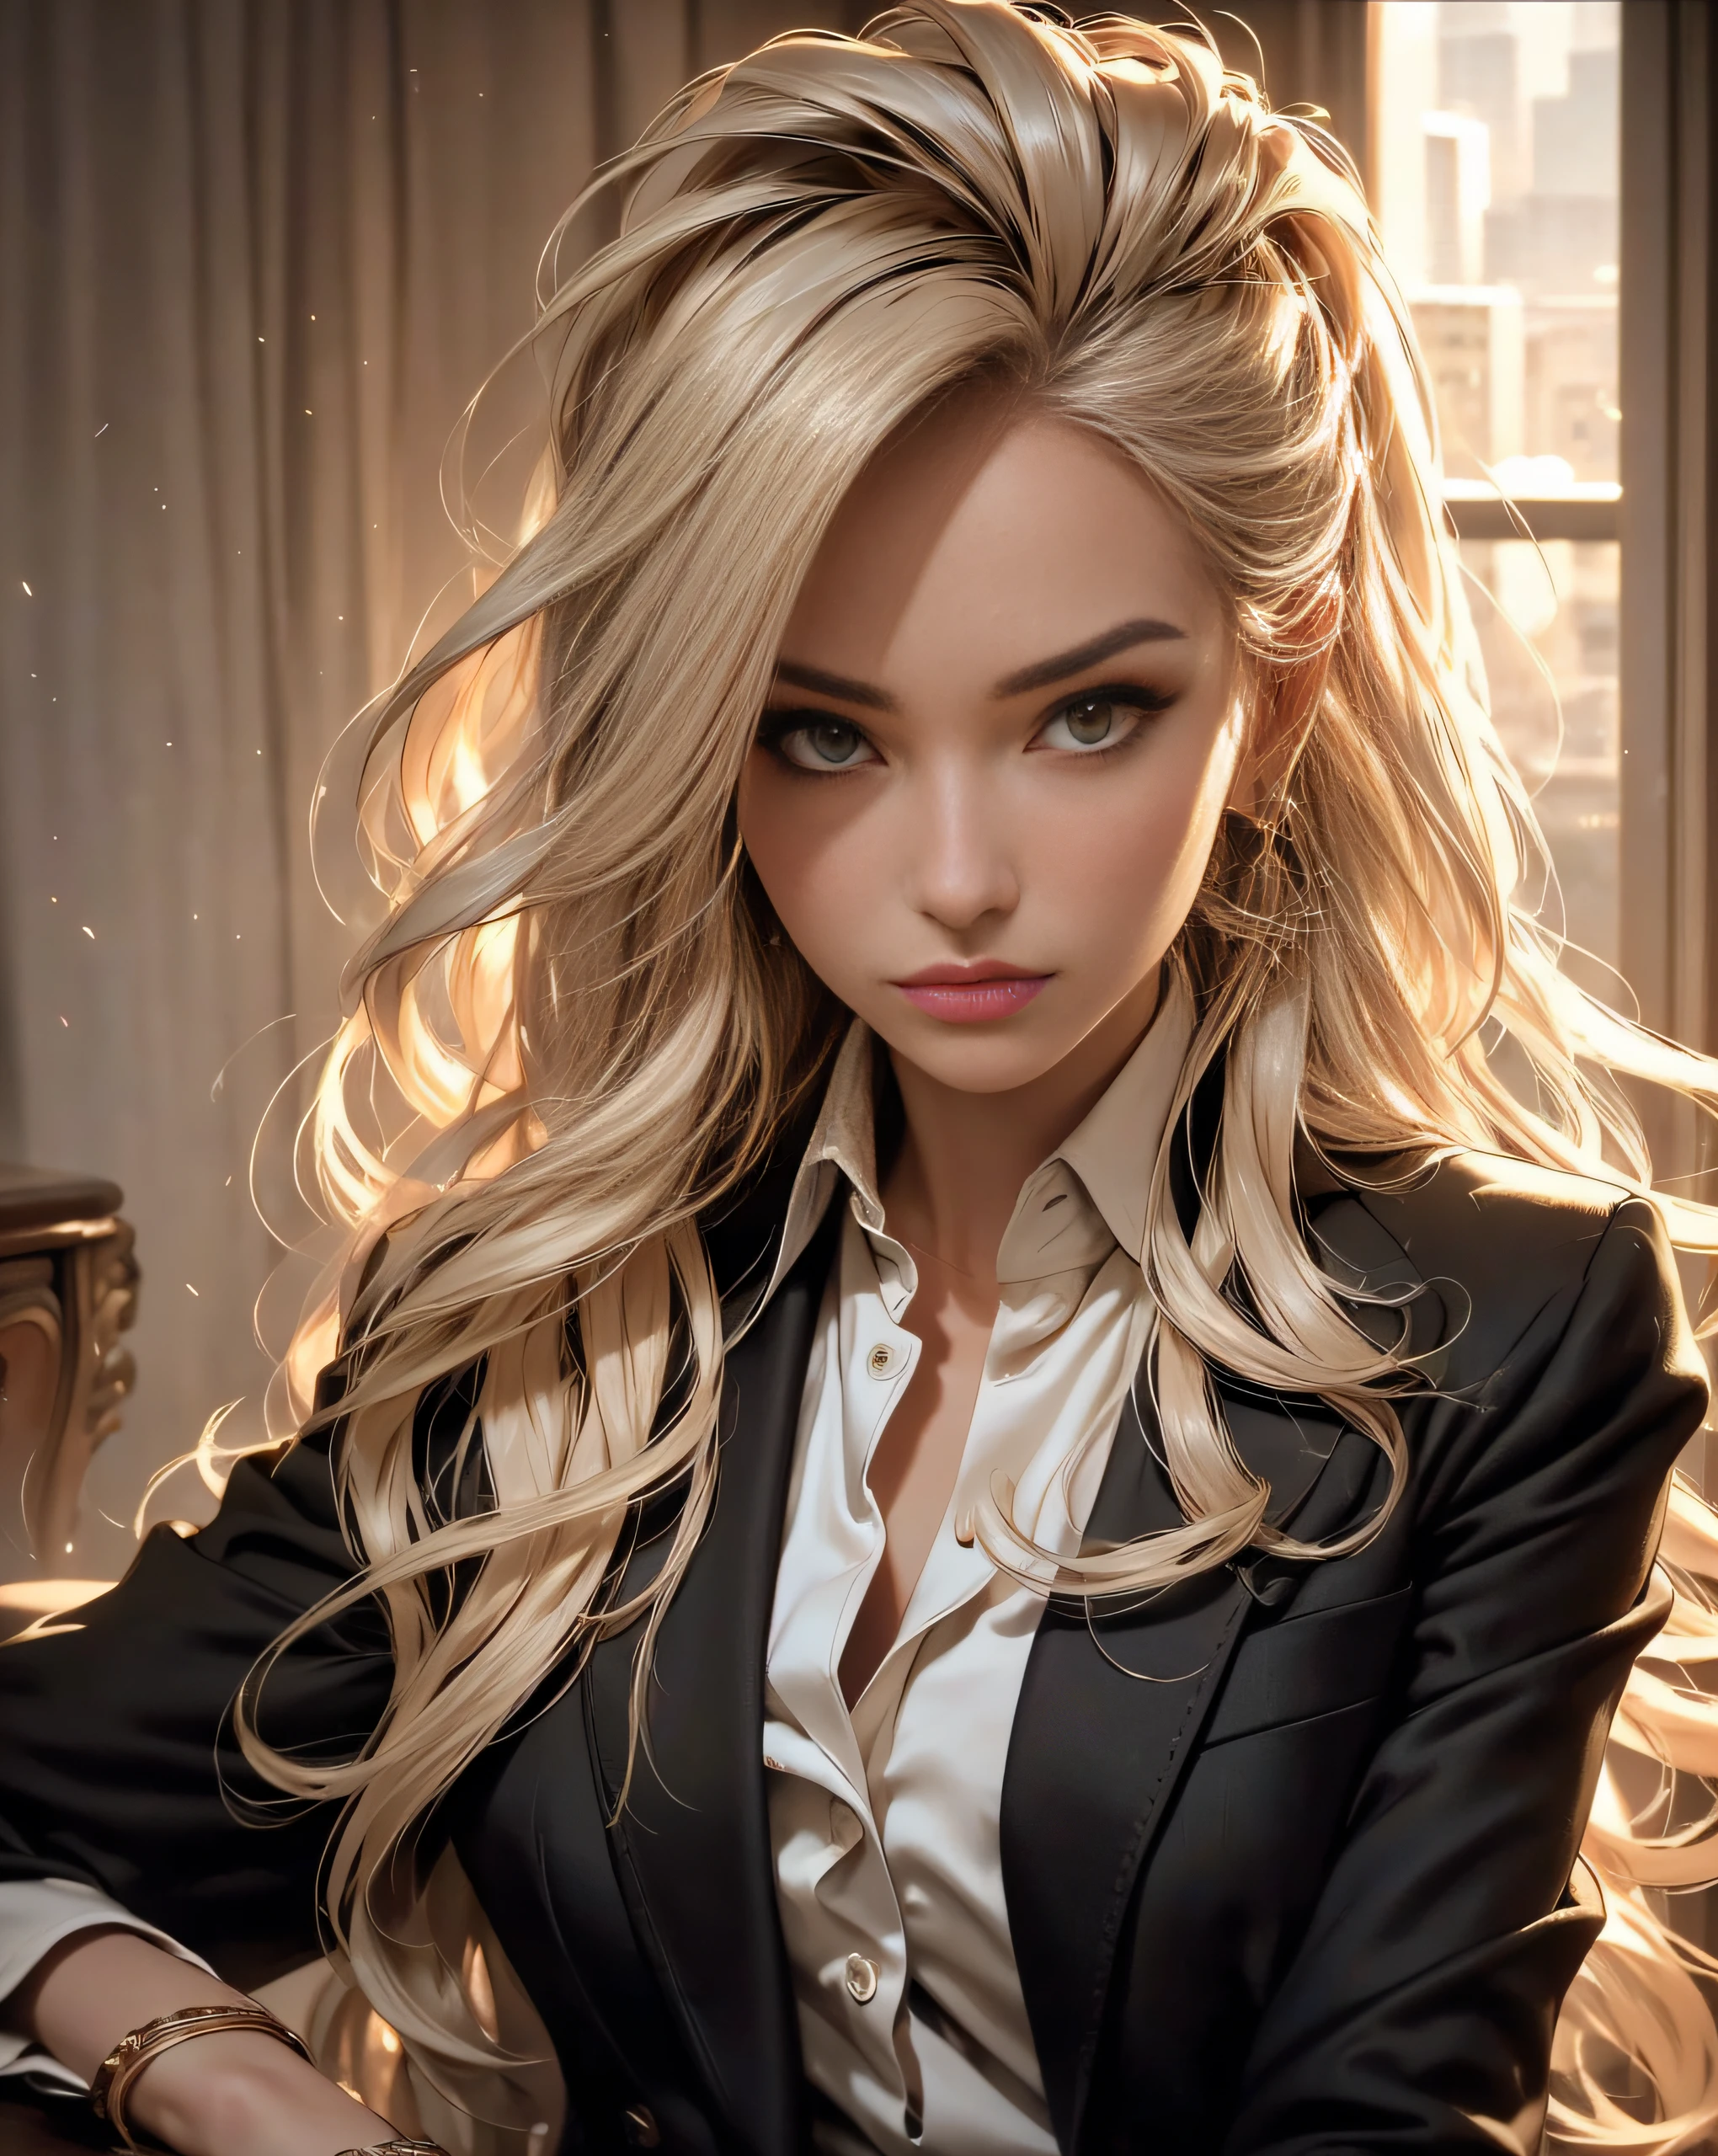 (high quality,realistic:1.2),portrait,golden hair,beautiful girl wearing a black jacket,detailed eyes,luscious lips,sensual gaze,luxurious texture,shimmering highlights,soft shadows,subtle smile,impeccable makeup,perfect skin tone,varied golden hues,mesmerizing presence,extraordinary attention to detail,immaculate shading,flawless complexion,expressive eyebrows,long eyelashes,graceful pose,stylish and confident demeanor,striking contrast between the jacket and hair,professional photography,rich color palette,subdued lighting,subtle bokeh effects,glowing complexion,meticulously crafted features,exquisite realism,artistic sophistication.